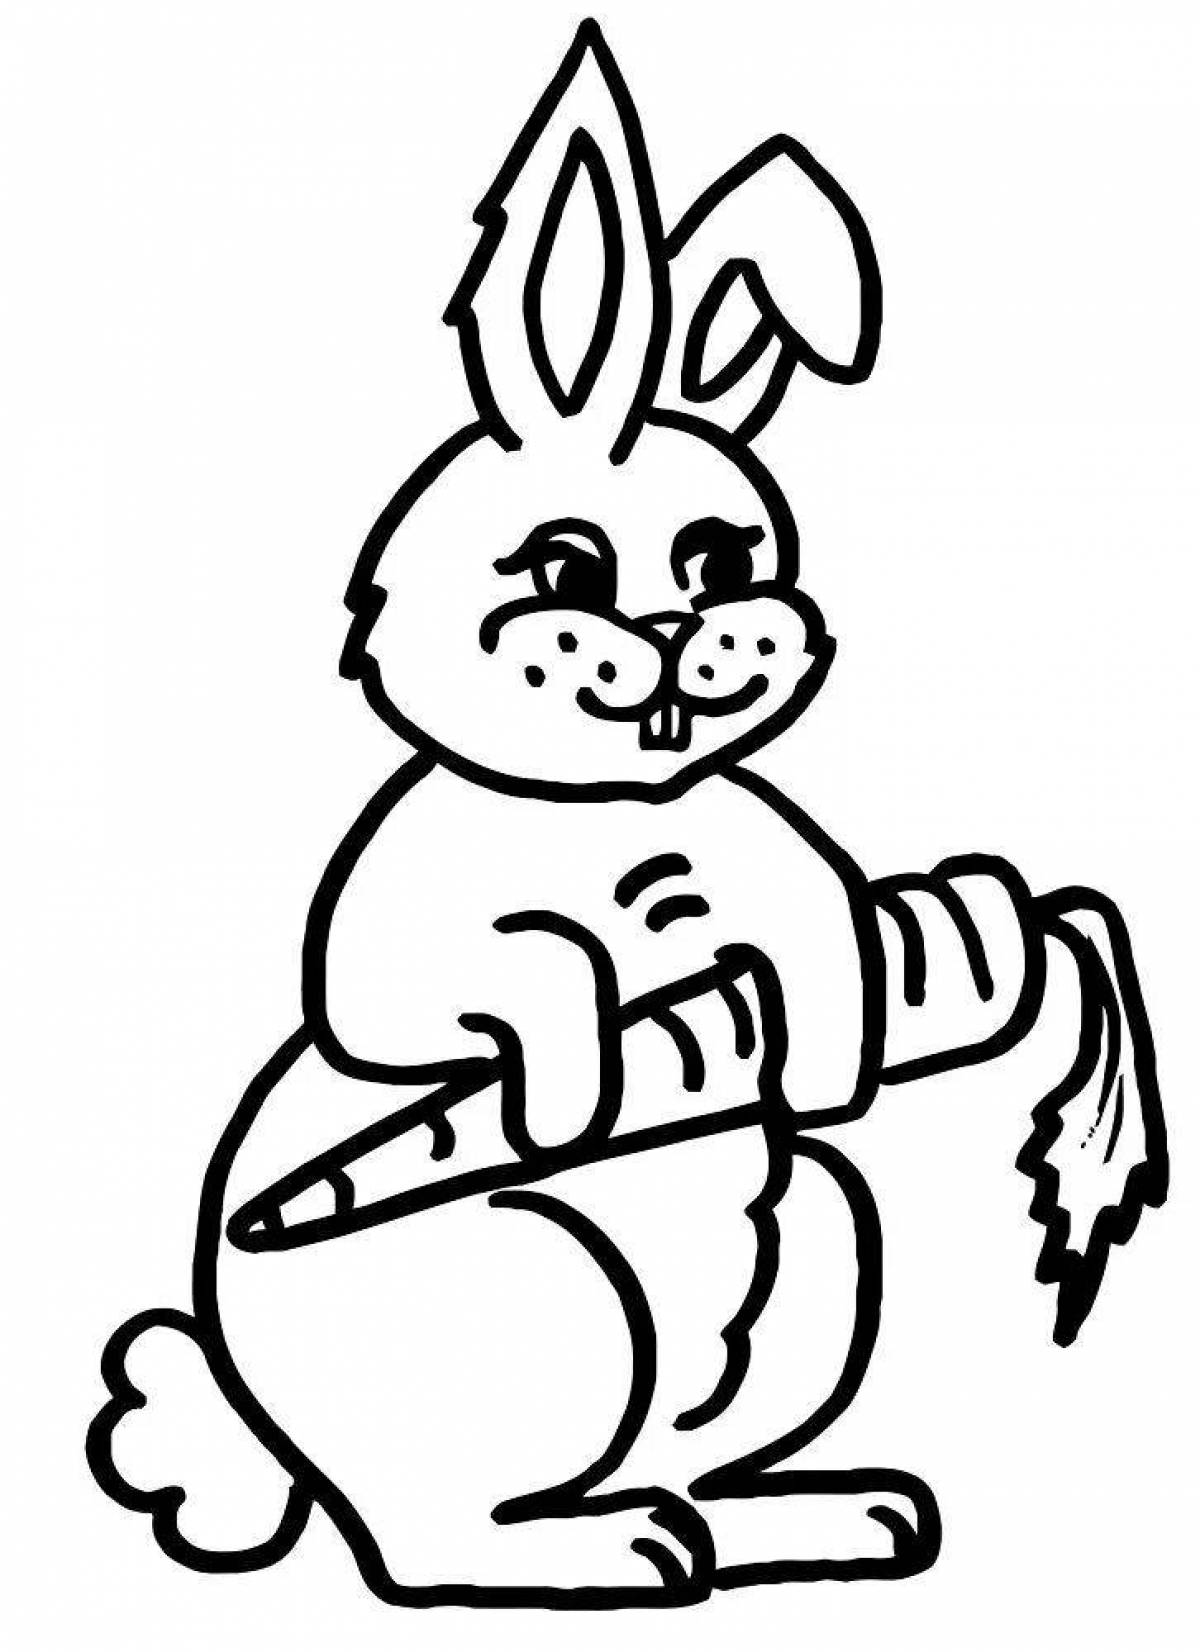 Loving coloring rabbit with carrots